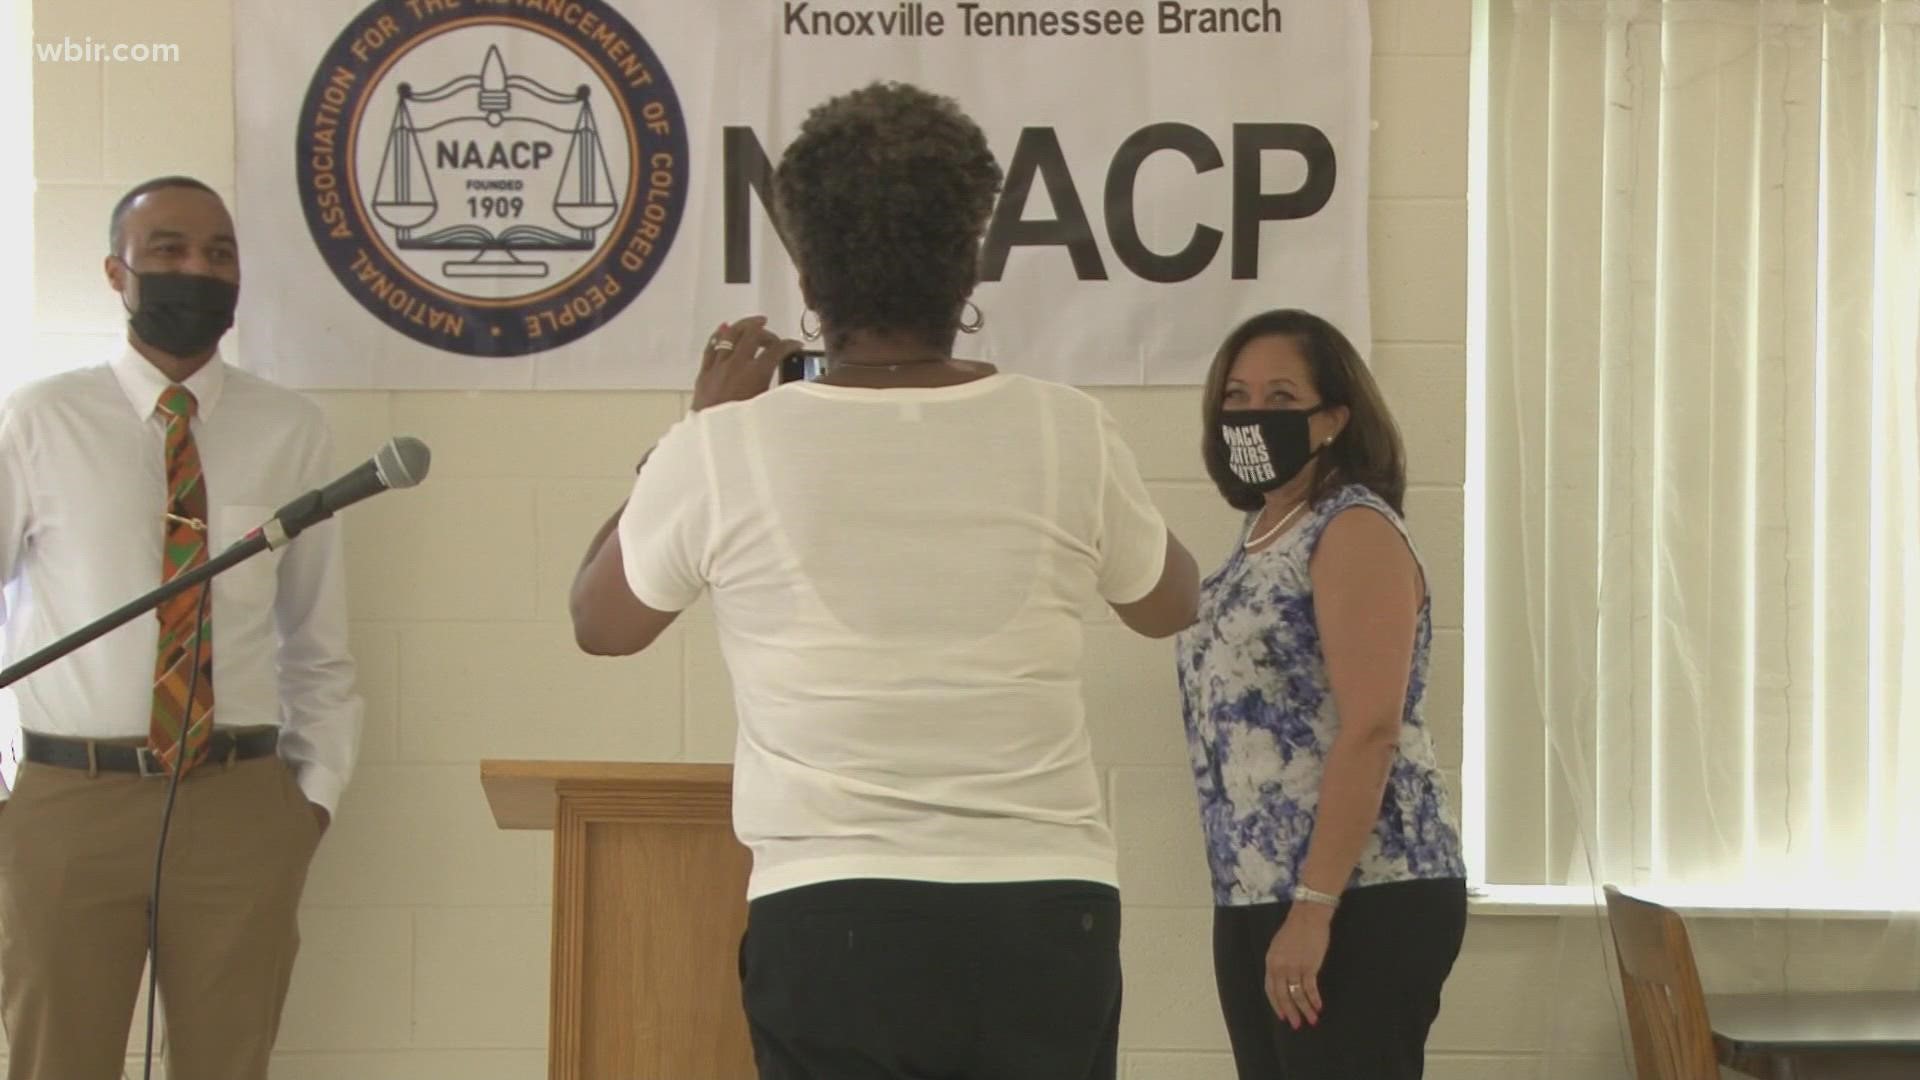 The NAACP held an open house at the new office space on Selma Avenue in East Knoxville.